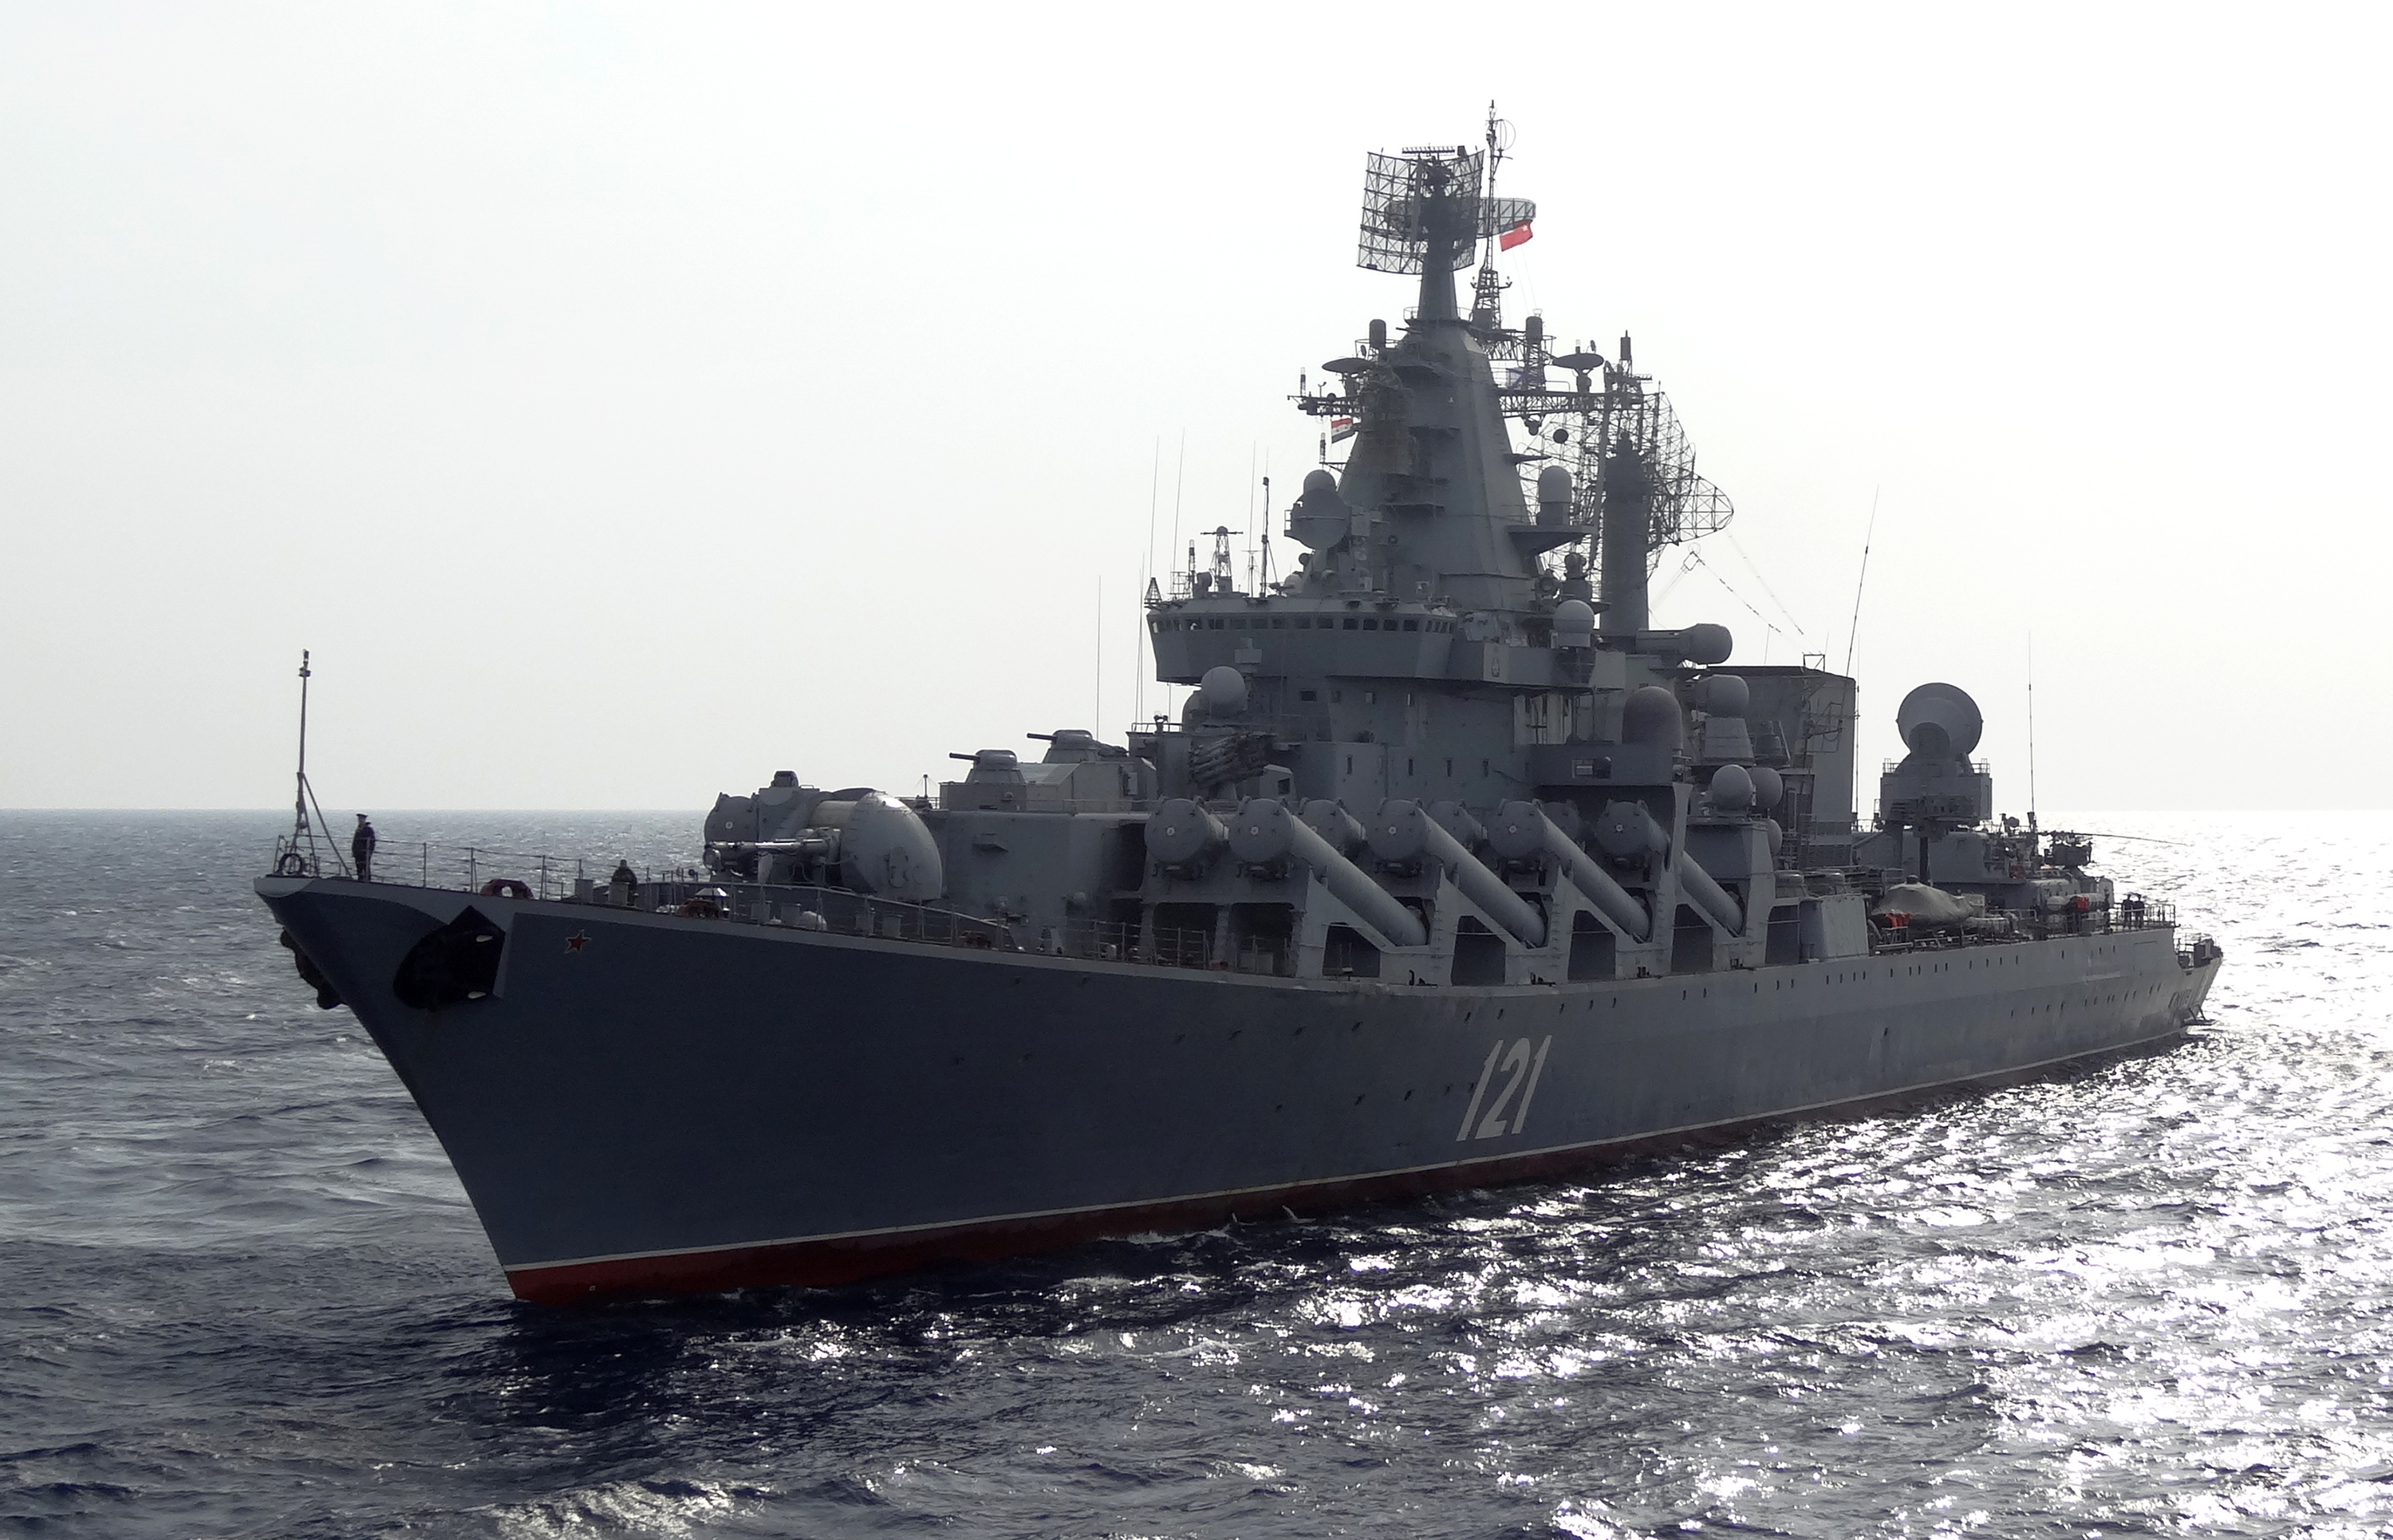 Historic loss of flagship deals humiliating blow to Russia's naval power